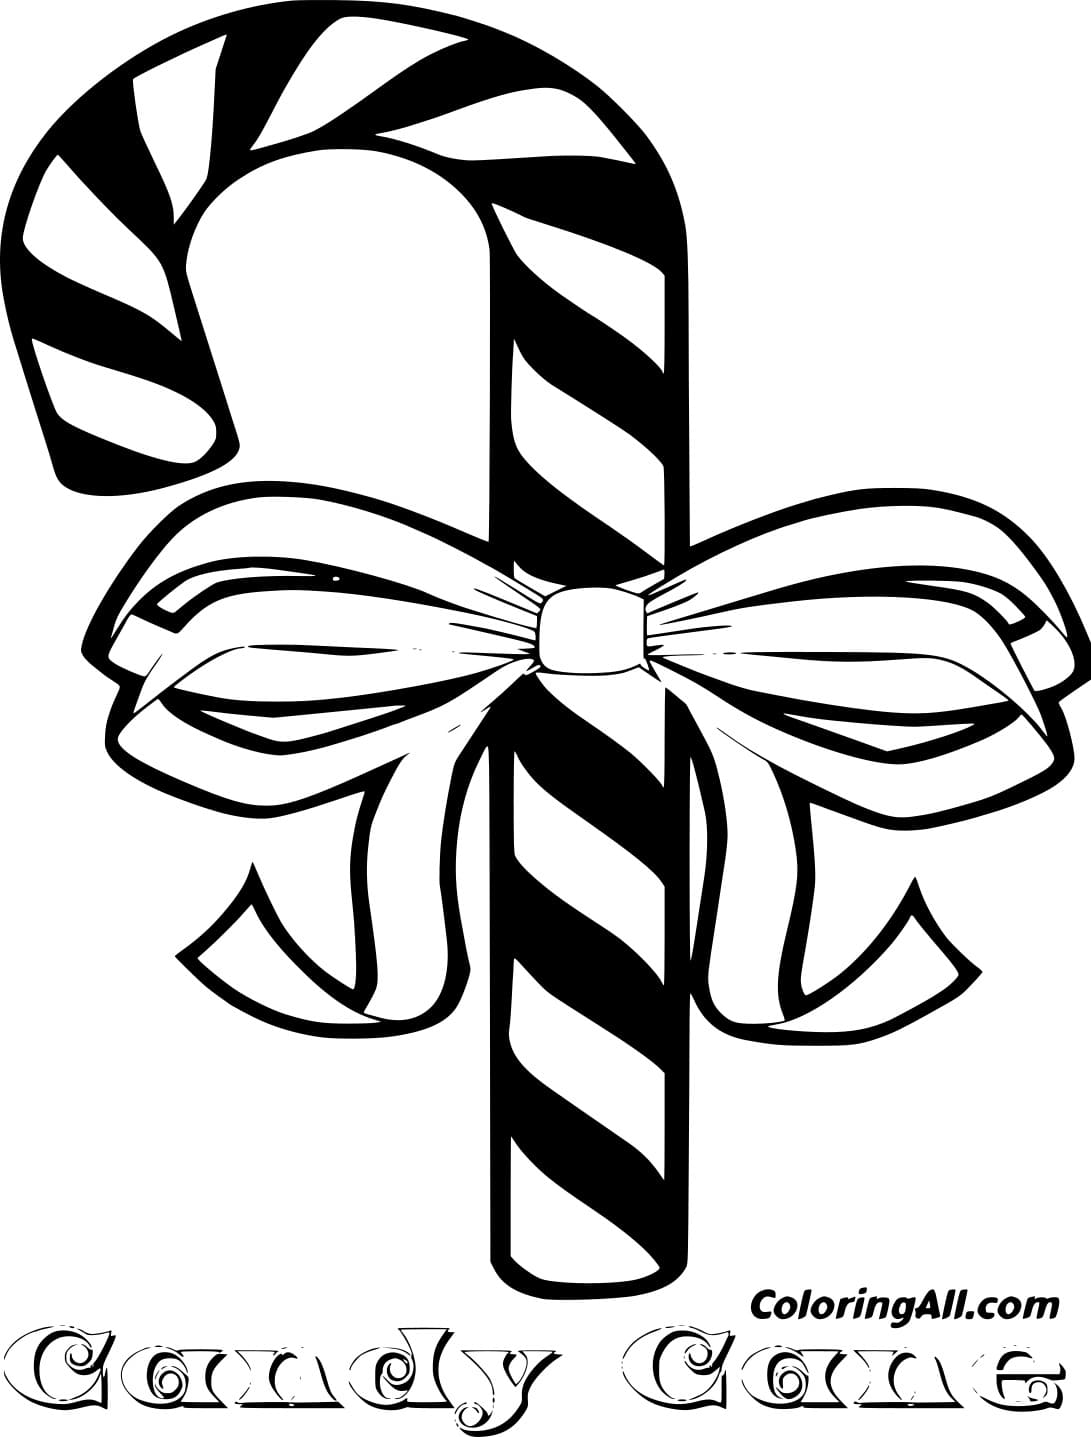 Thick Candy Cane With A Bowknot Printable Coloring Page